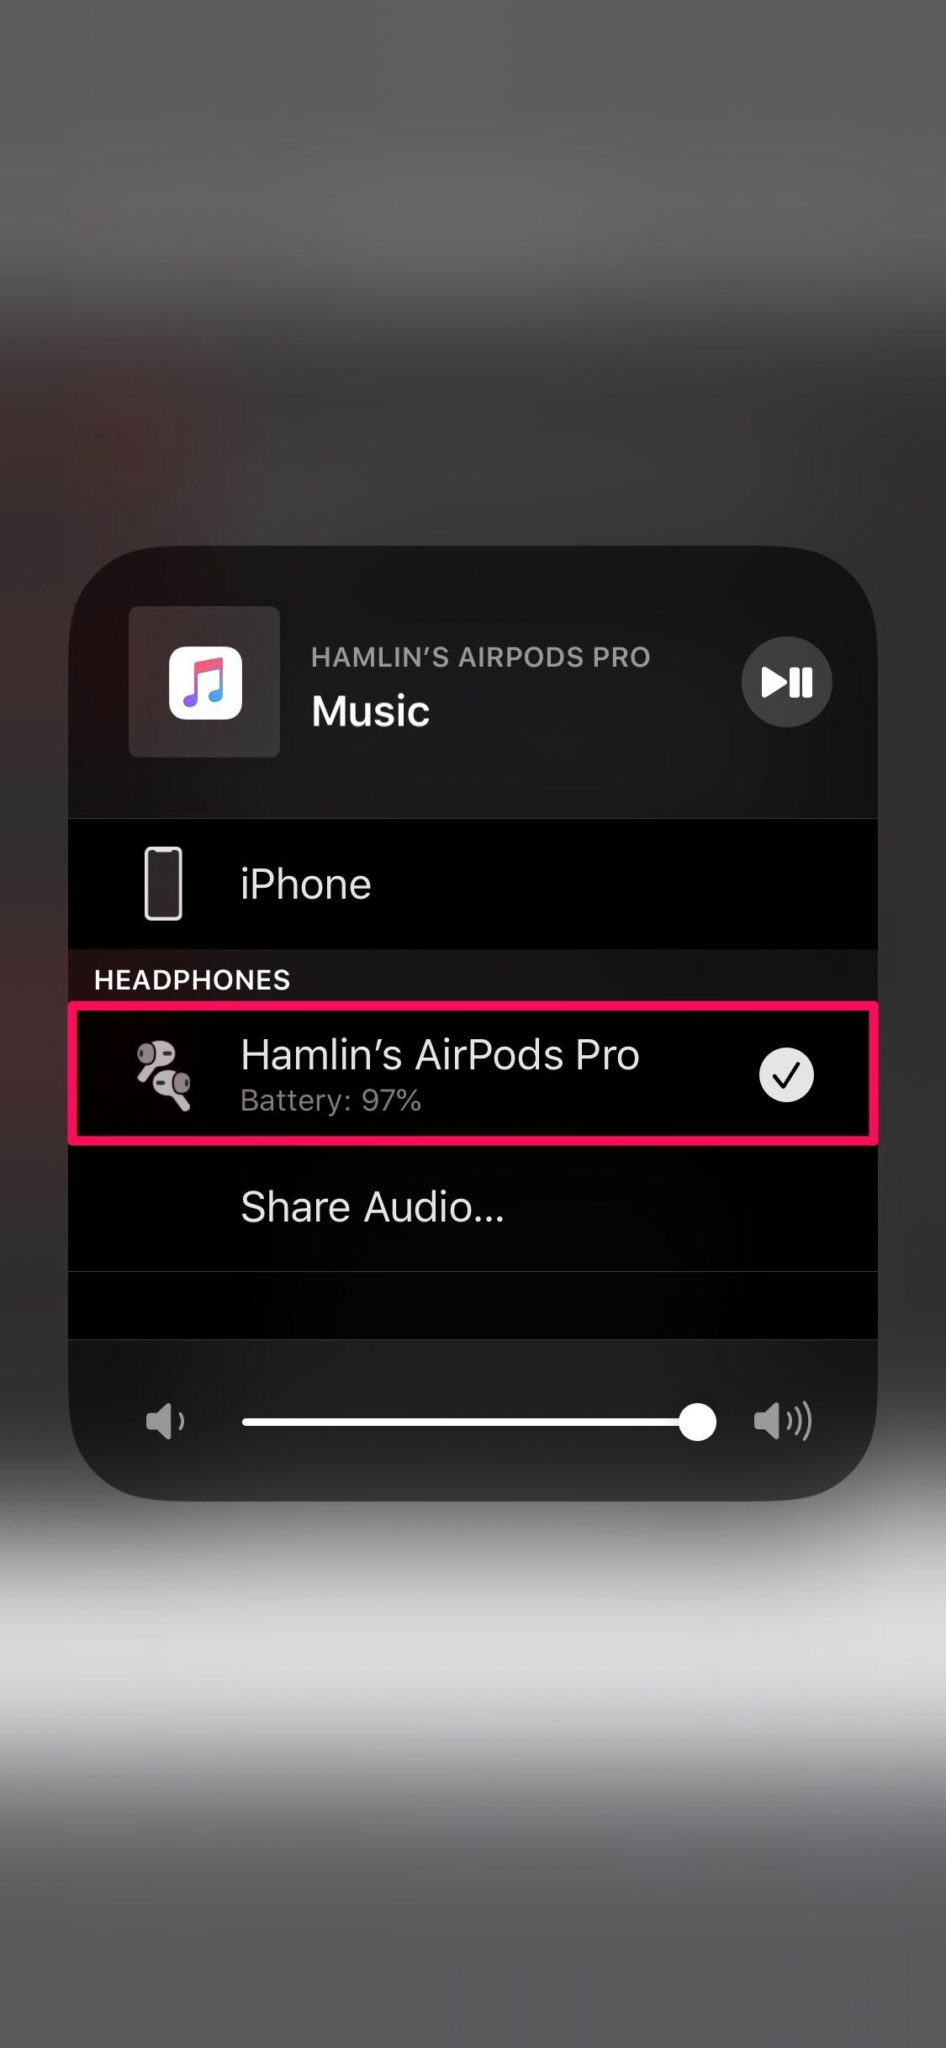 One AirPod Not Working? Here’s How to Fix Left or Right AirPods Not Working